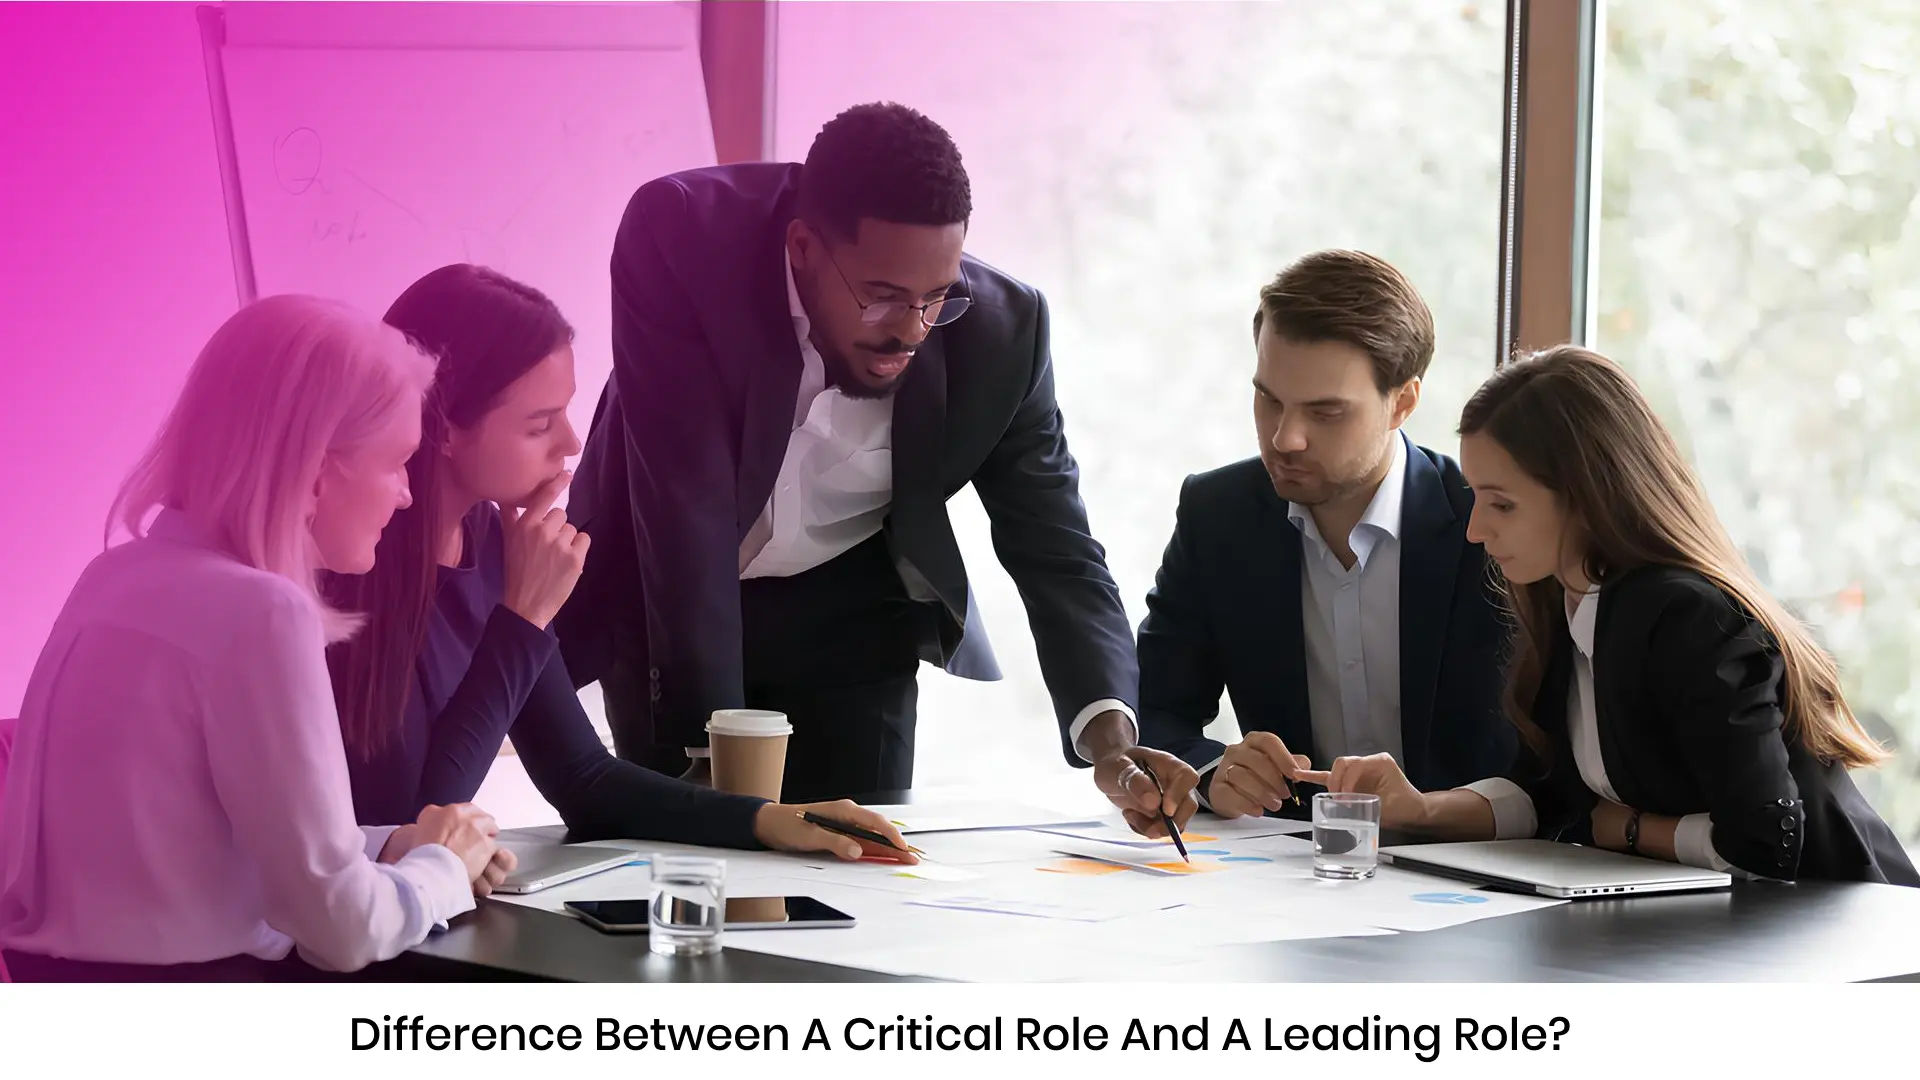 Comparing Critical and Leading Roles